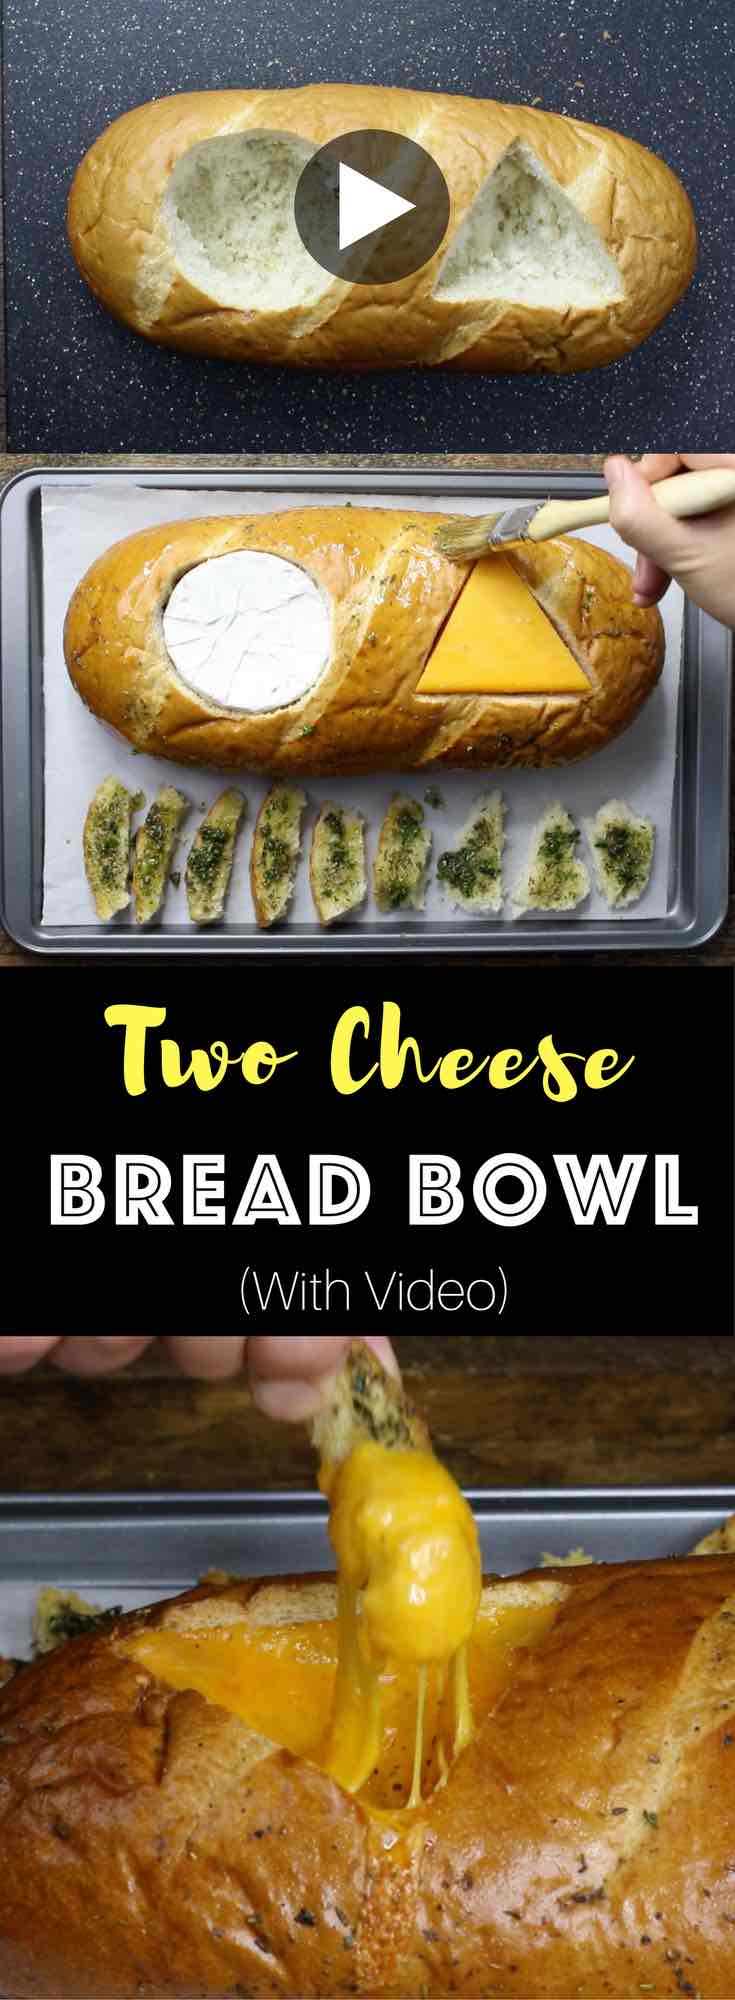 Two Cheese Bread Bowl – Flavorful, fondue-like camembert and cheddar cheese baked inside of bread loaf. Served crispy Italian and herb seasoned bread slices. So Good! This cheese dip recipe is a quick and easy snack recipe that’s perfect for a holiday party or Super Bowl party. Vegetarian, video recipe. | Tipbuzz.com